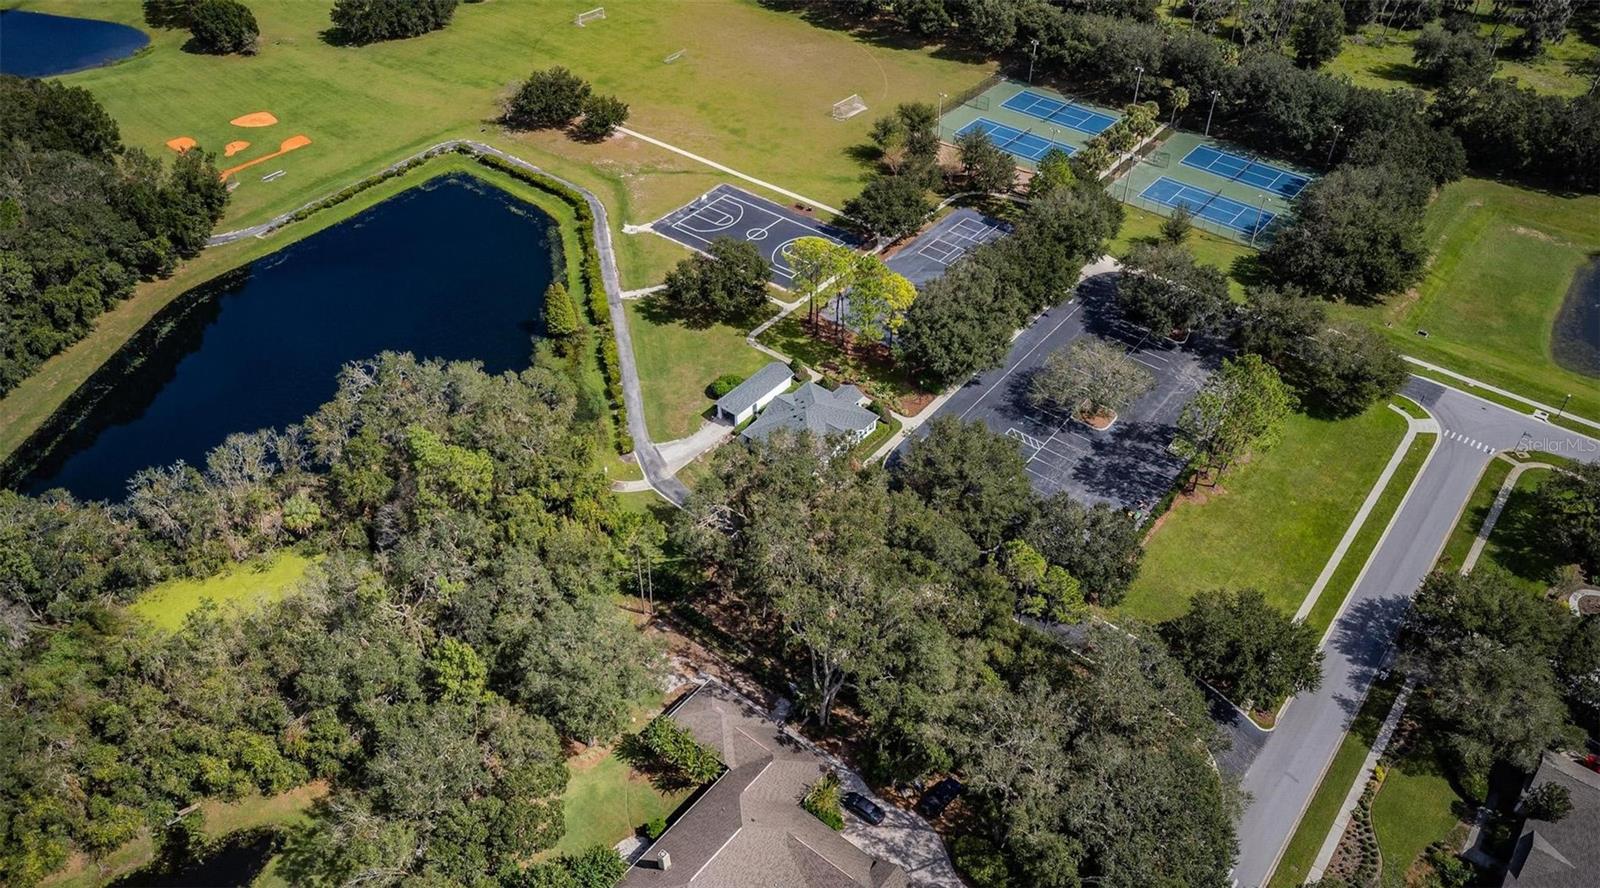 Aerial View of Clubhouse, Tennis Courts, Basketball Courts